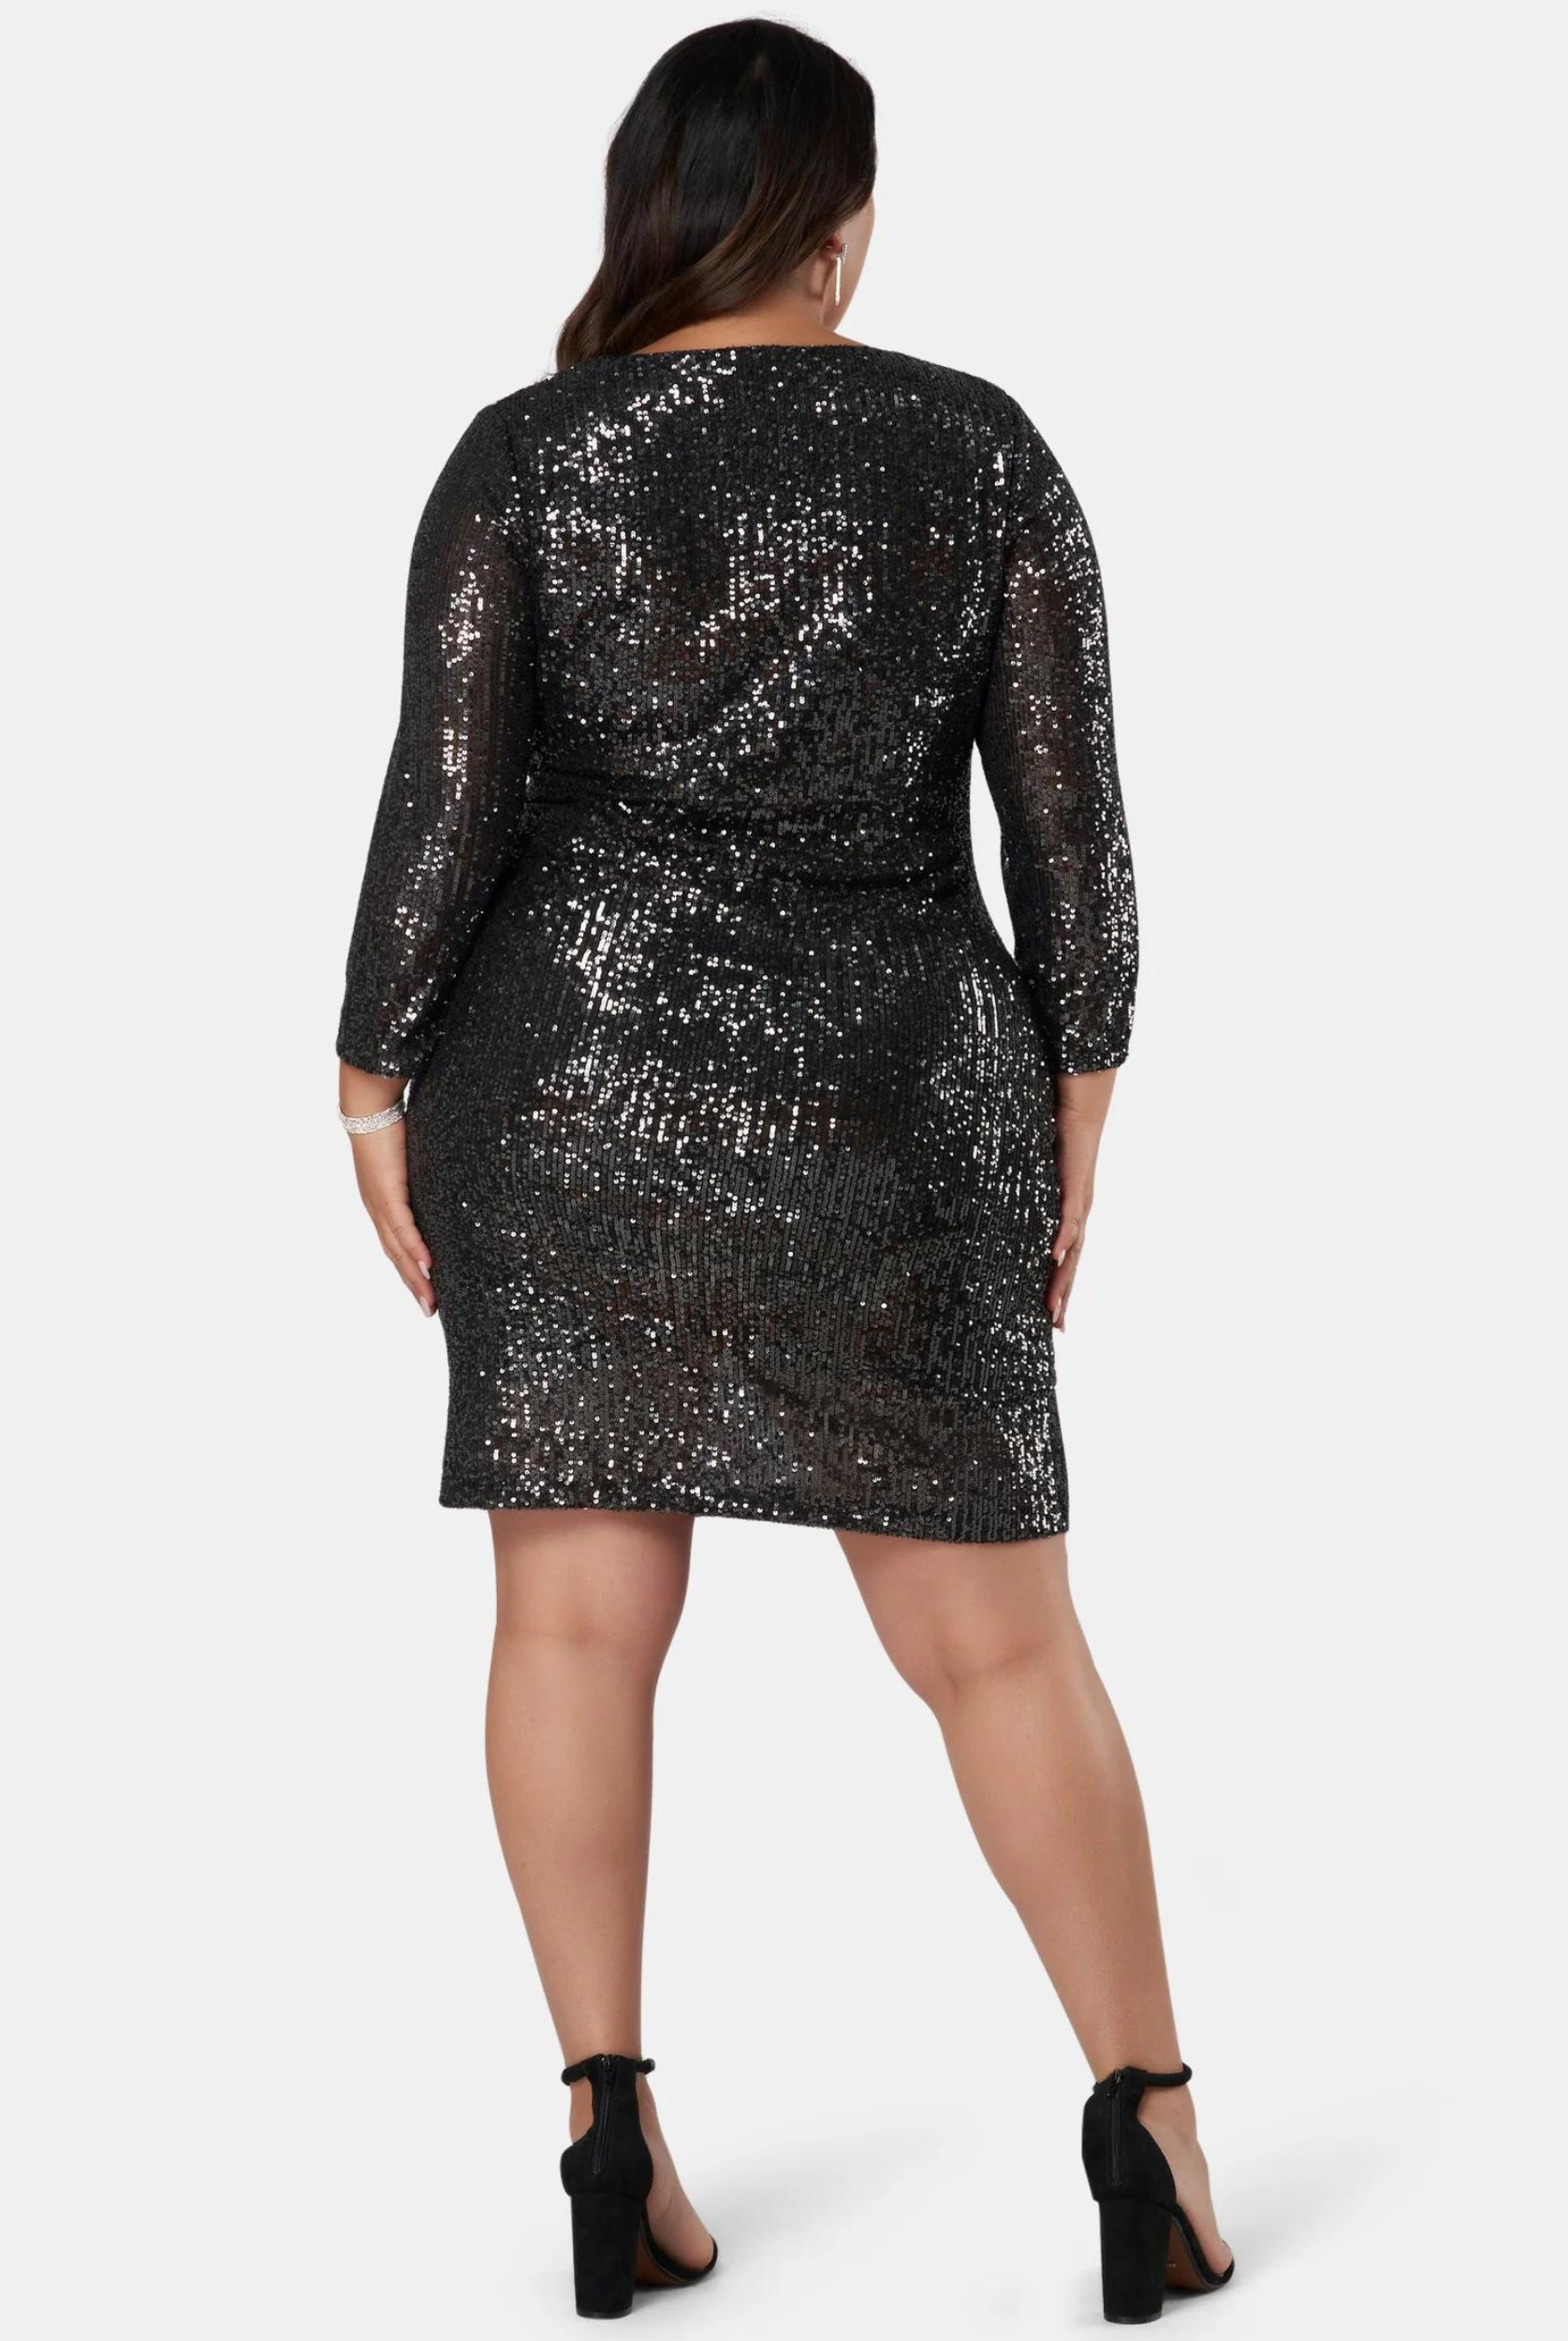 Curve Model wearing the Smoking Hot Sequin wrap dress in black mini length